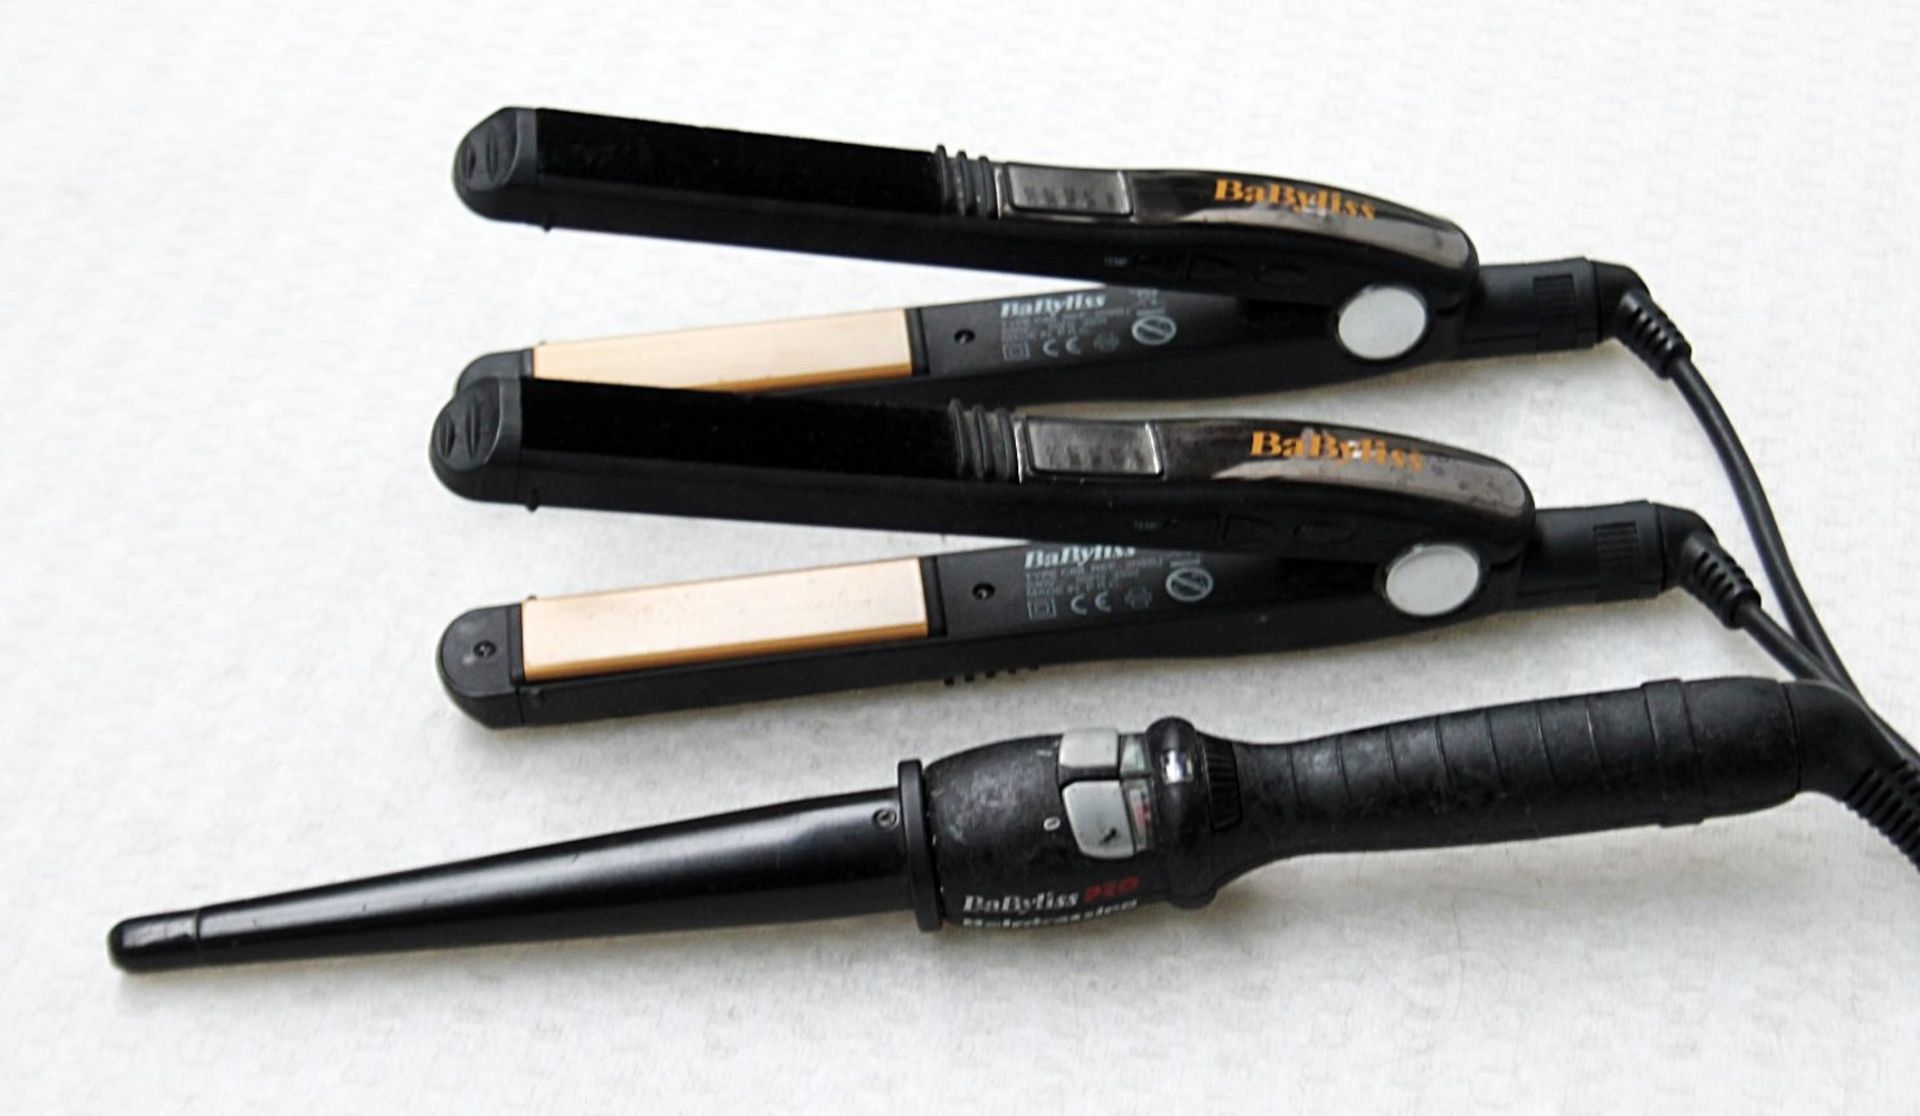 2 x Pairs Of Babyliss Hair Straighteners And 1 x Babyliss Pro Conical Wand - Recently Removed From A